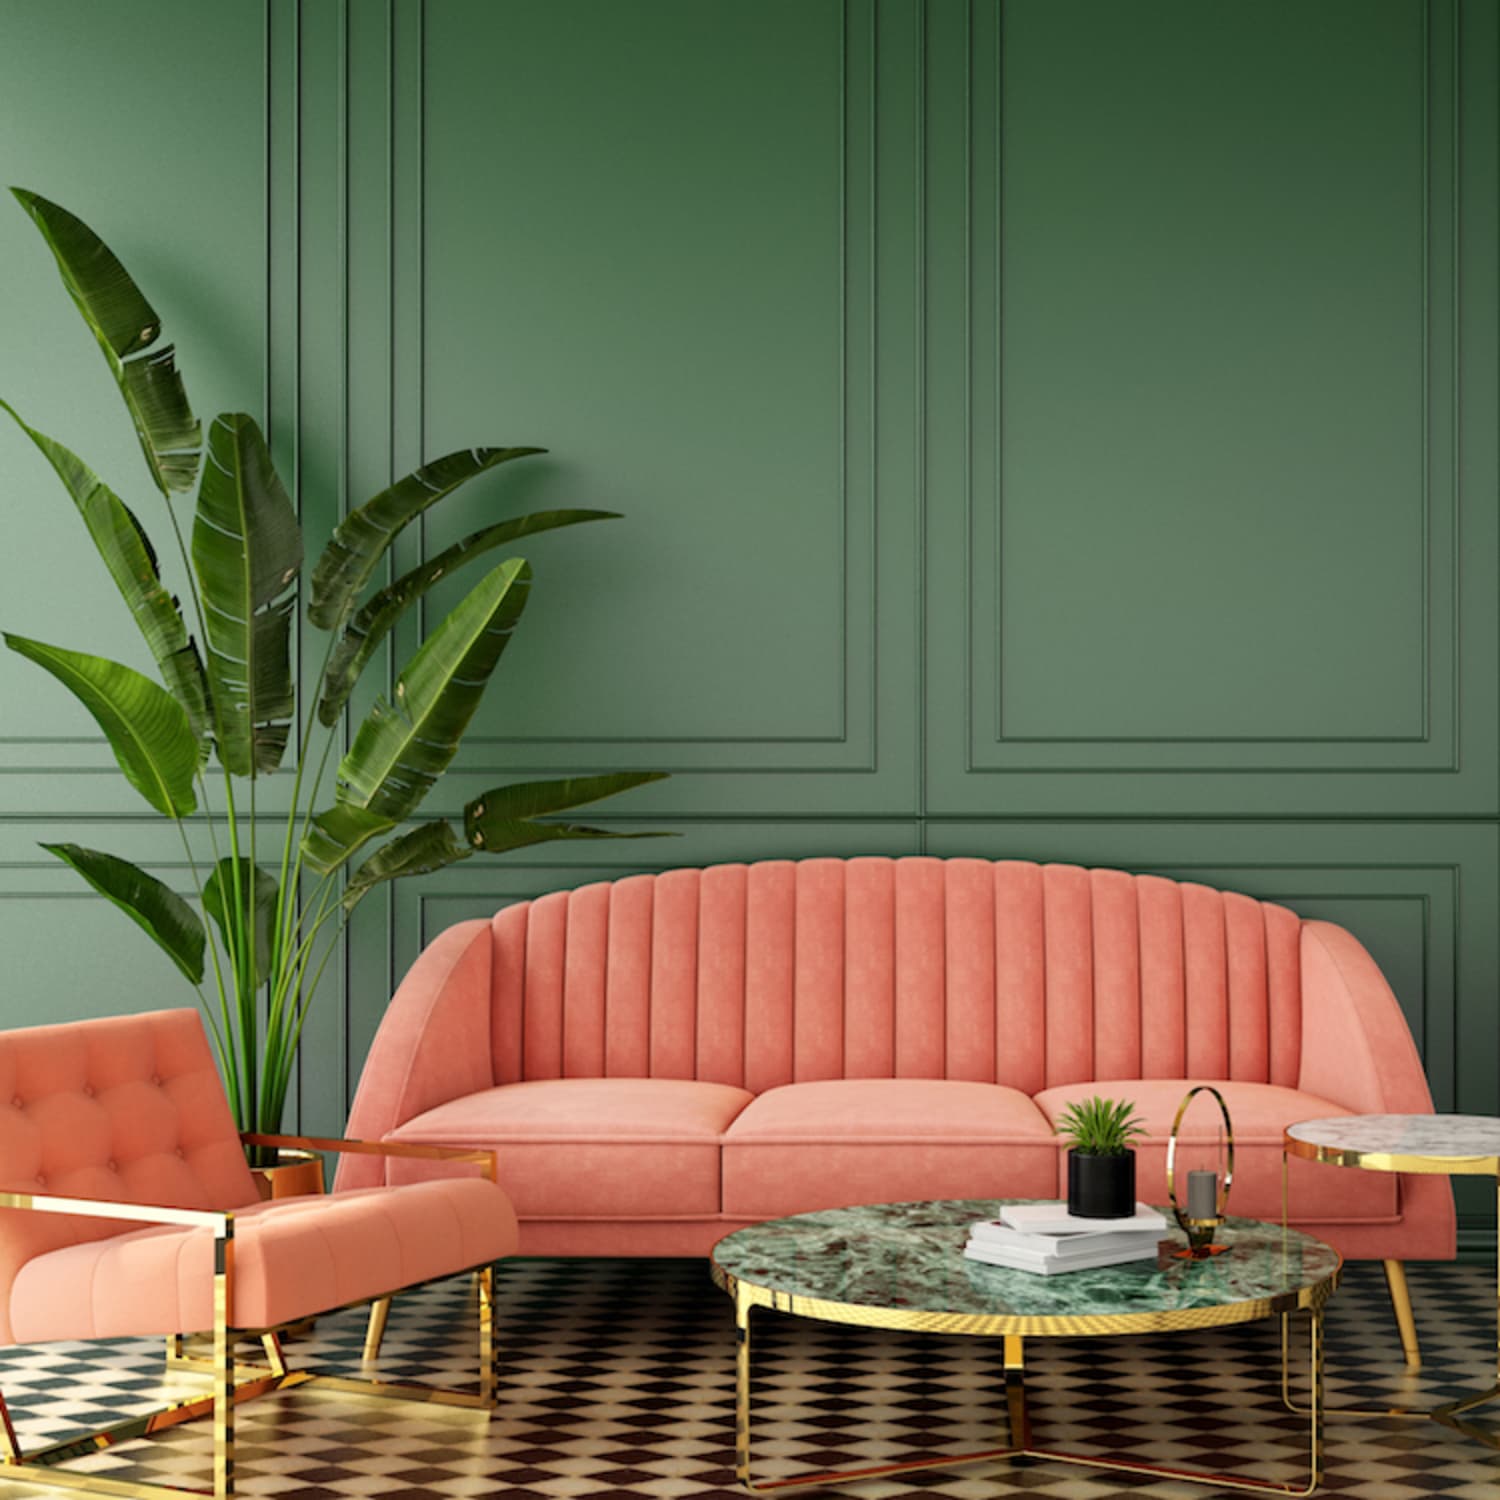 Pantone Releases Color Trend Report For Spring/Summer 2021